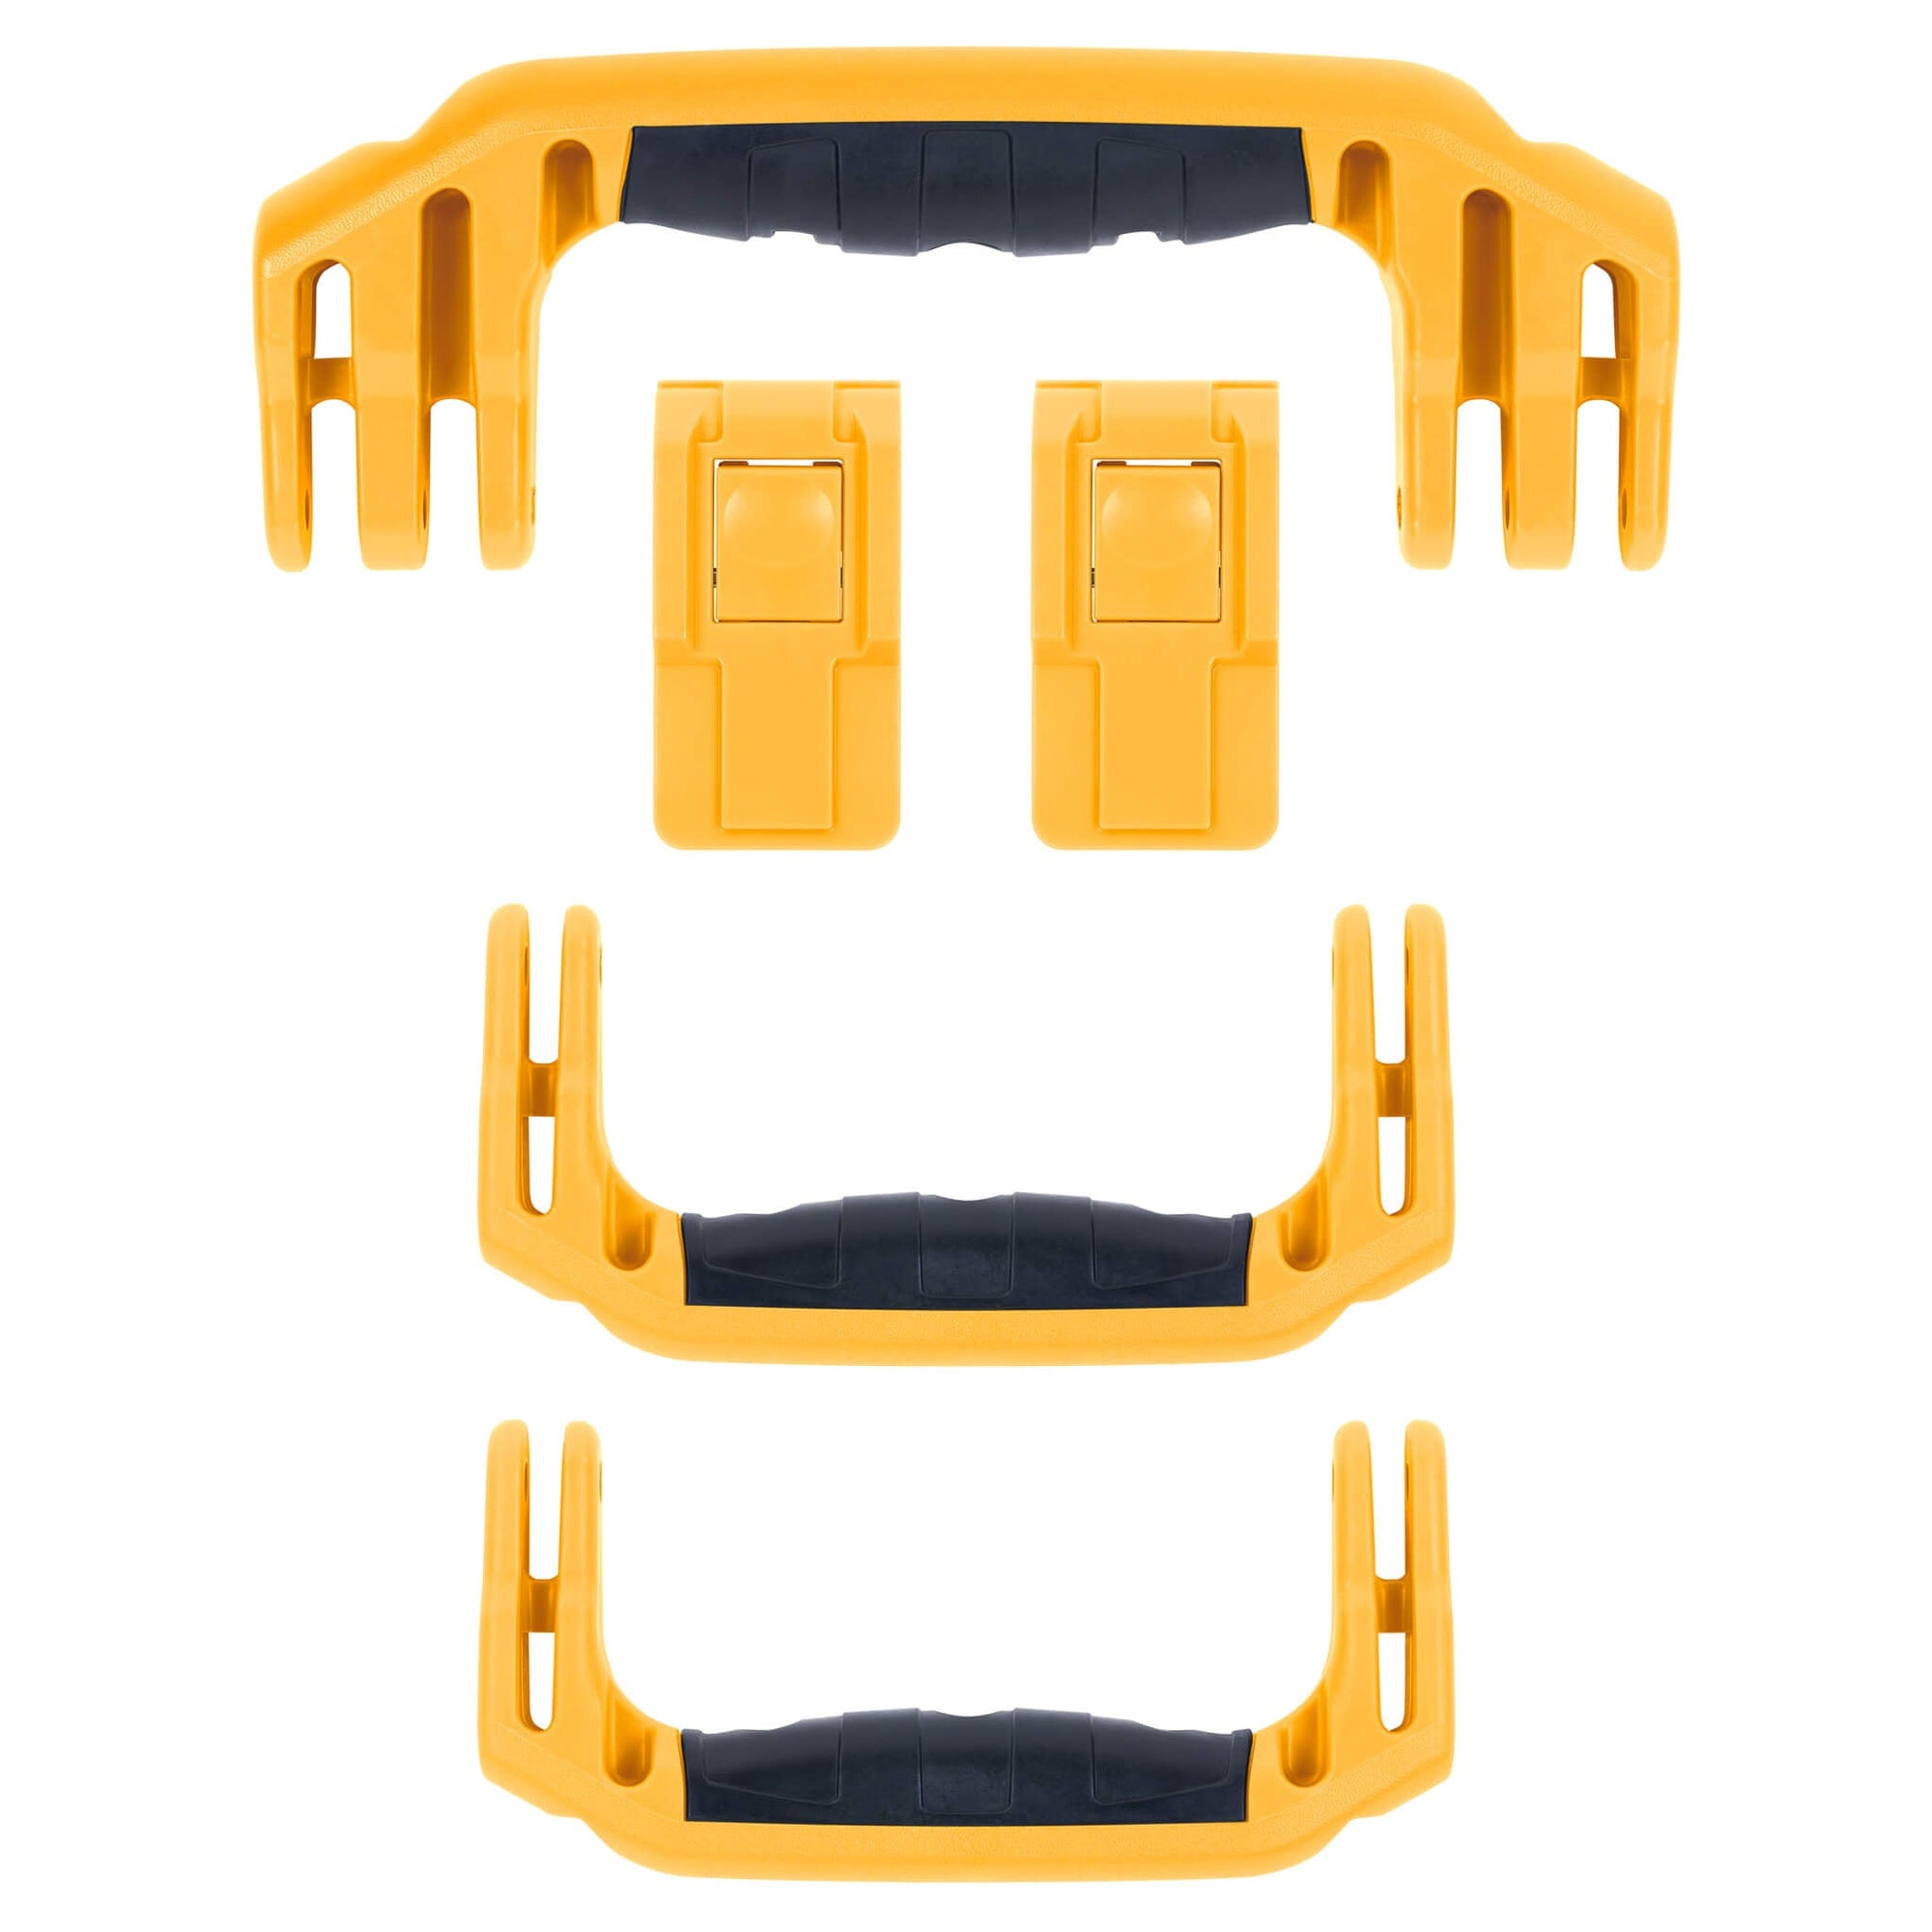 Pelican 1465 Air Replacement Handles & Latches, Yellow, Push-Button (Set of 3 Handles, 2 Latches) ColorCase 